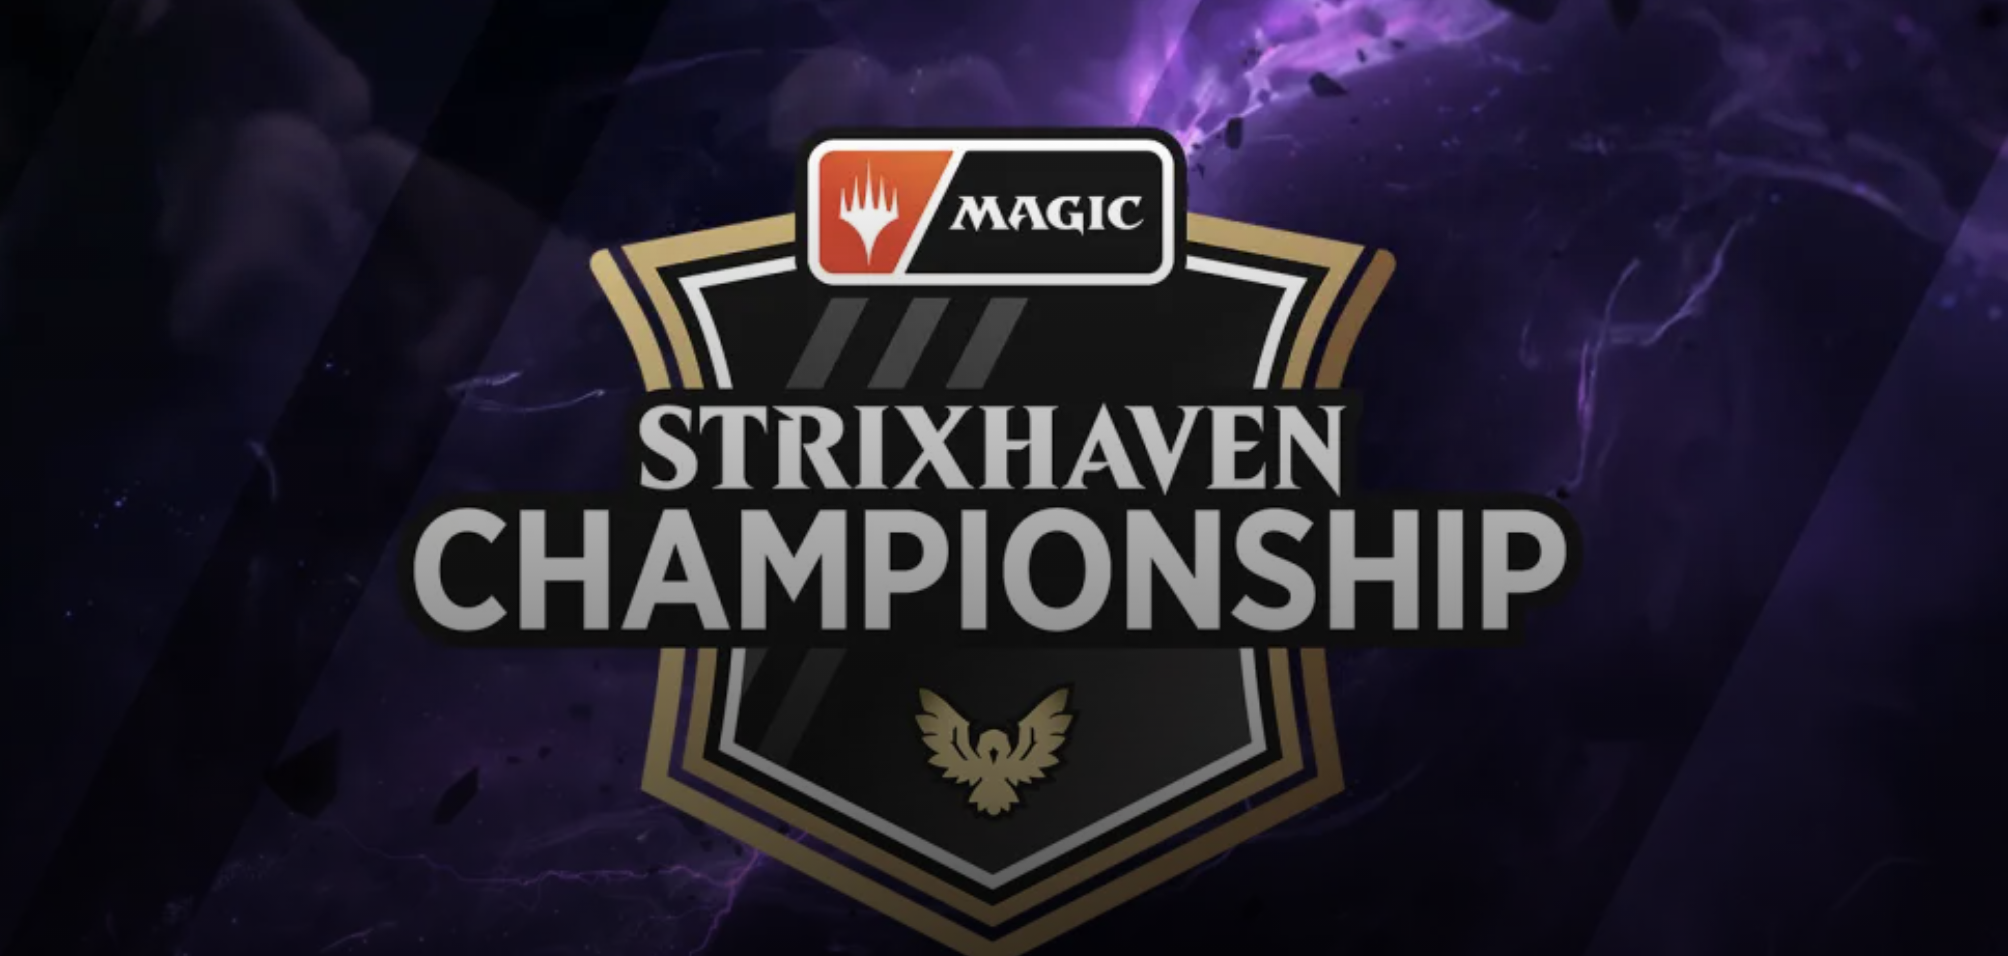 The official logo of the Strixhaven Championship